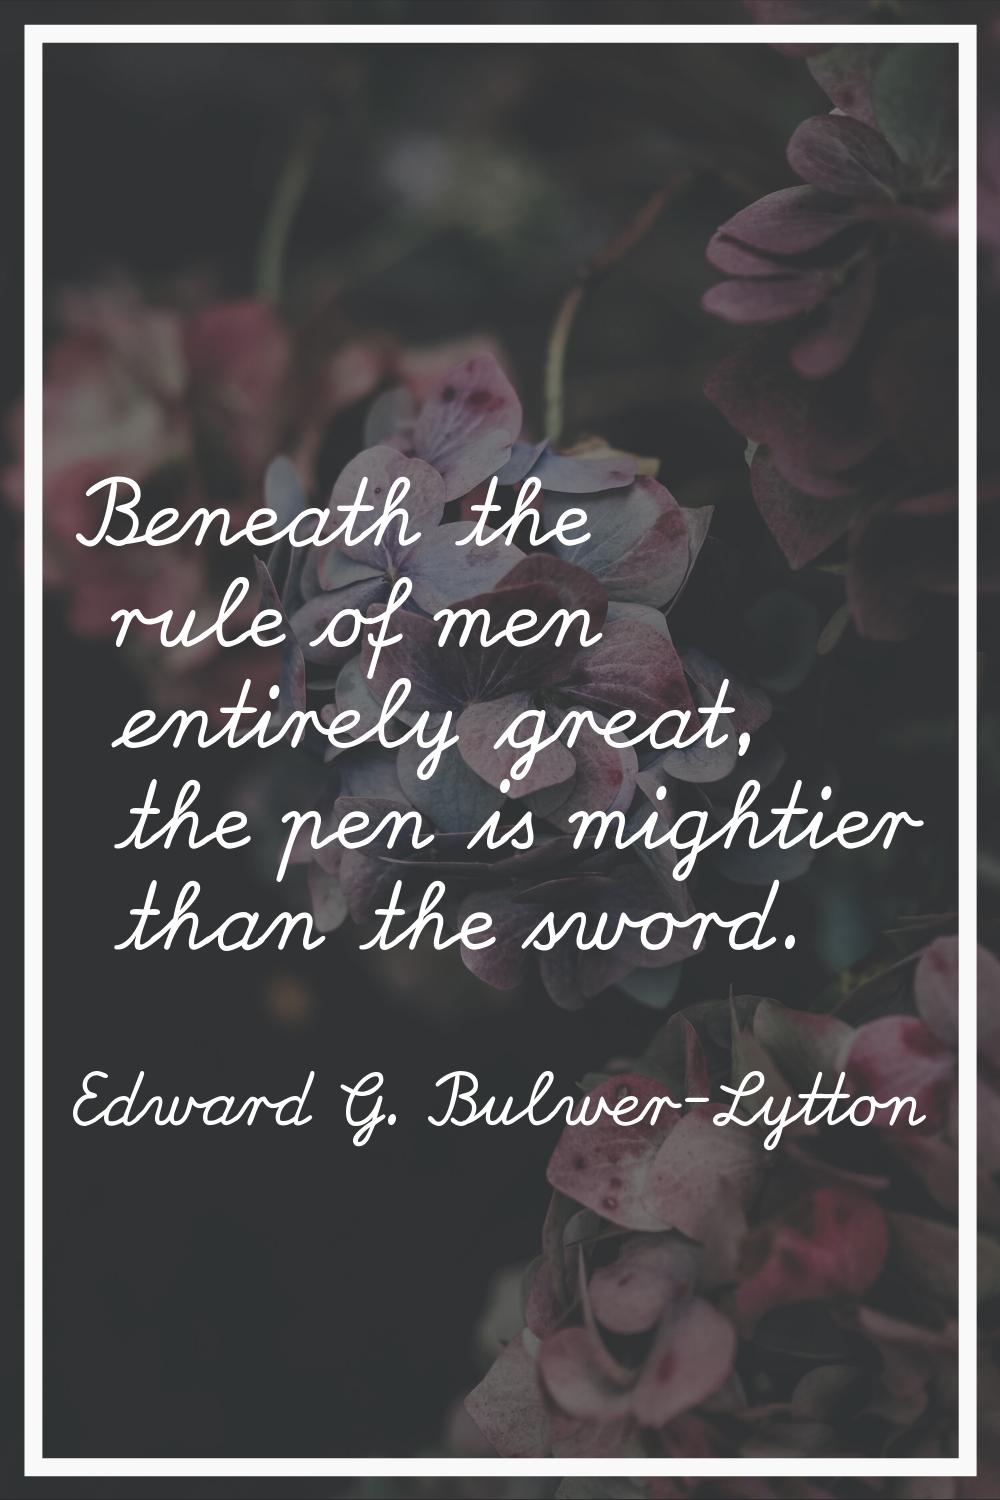 Beneath the rule of men entirely great, the pen is mightier than the sword.